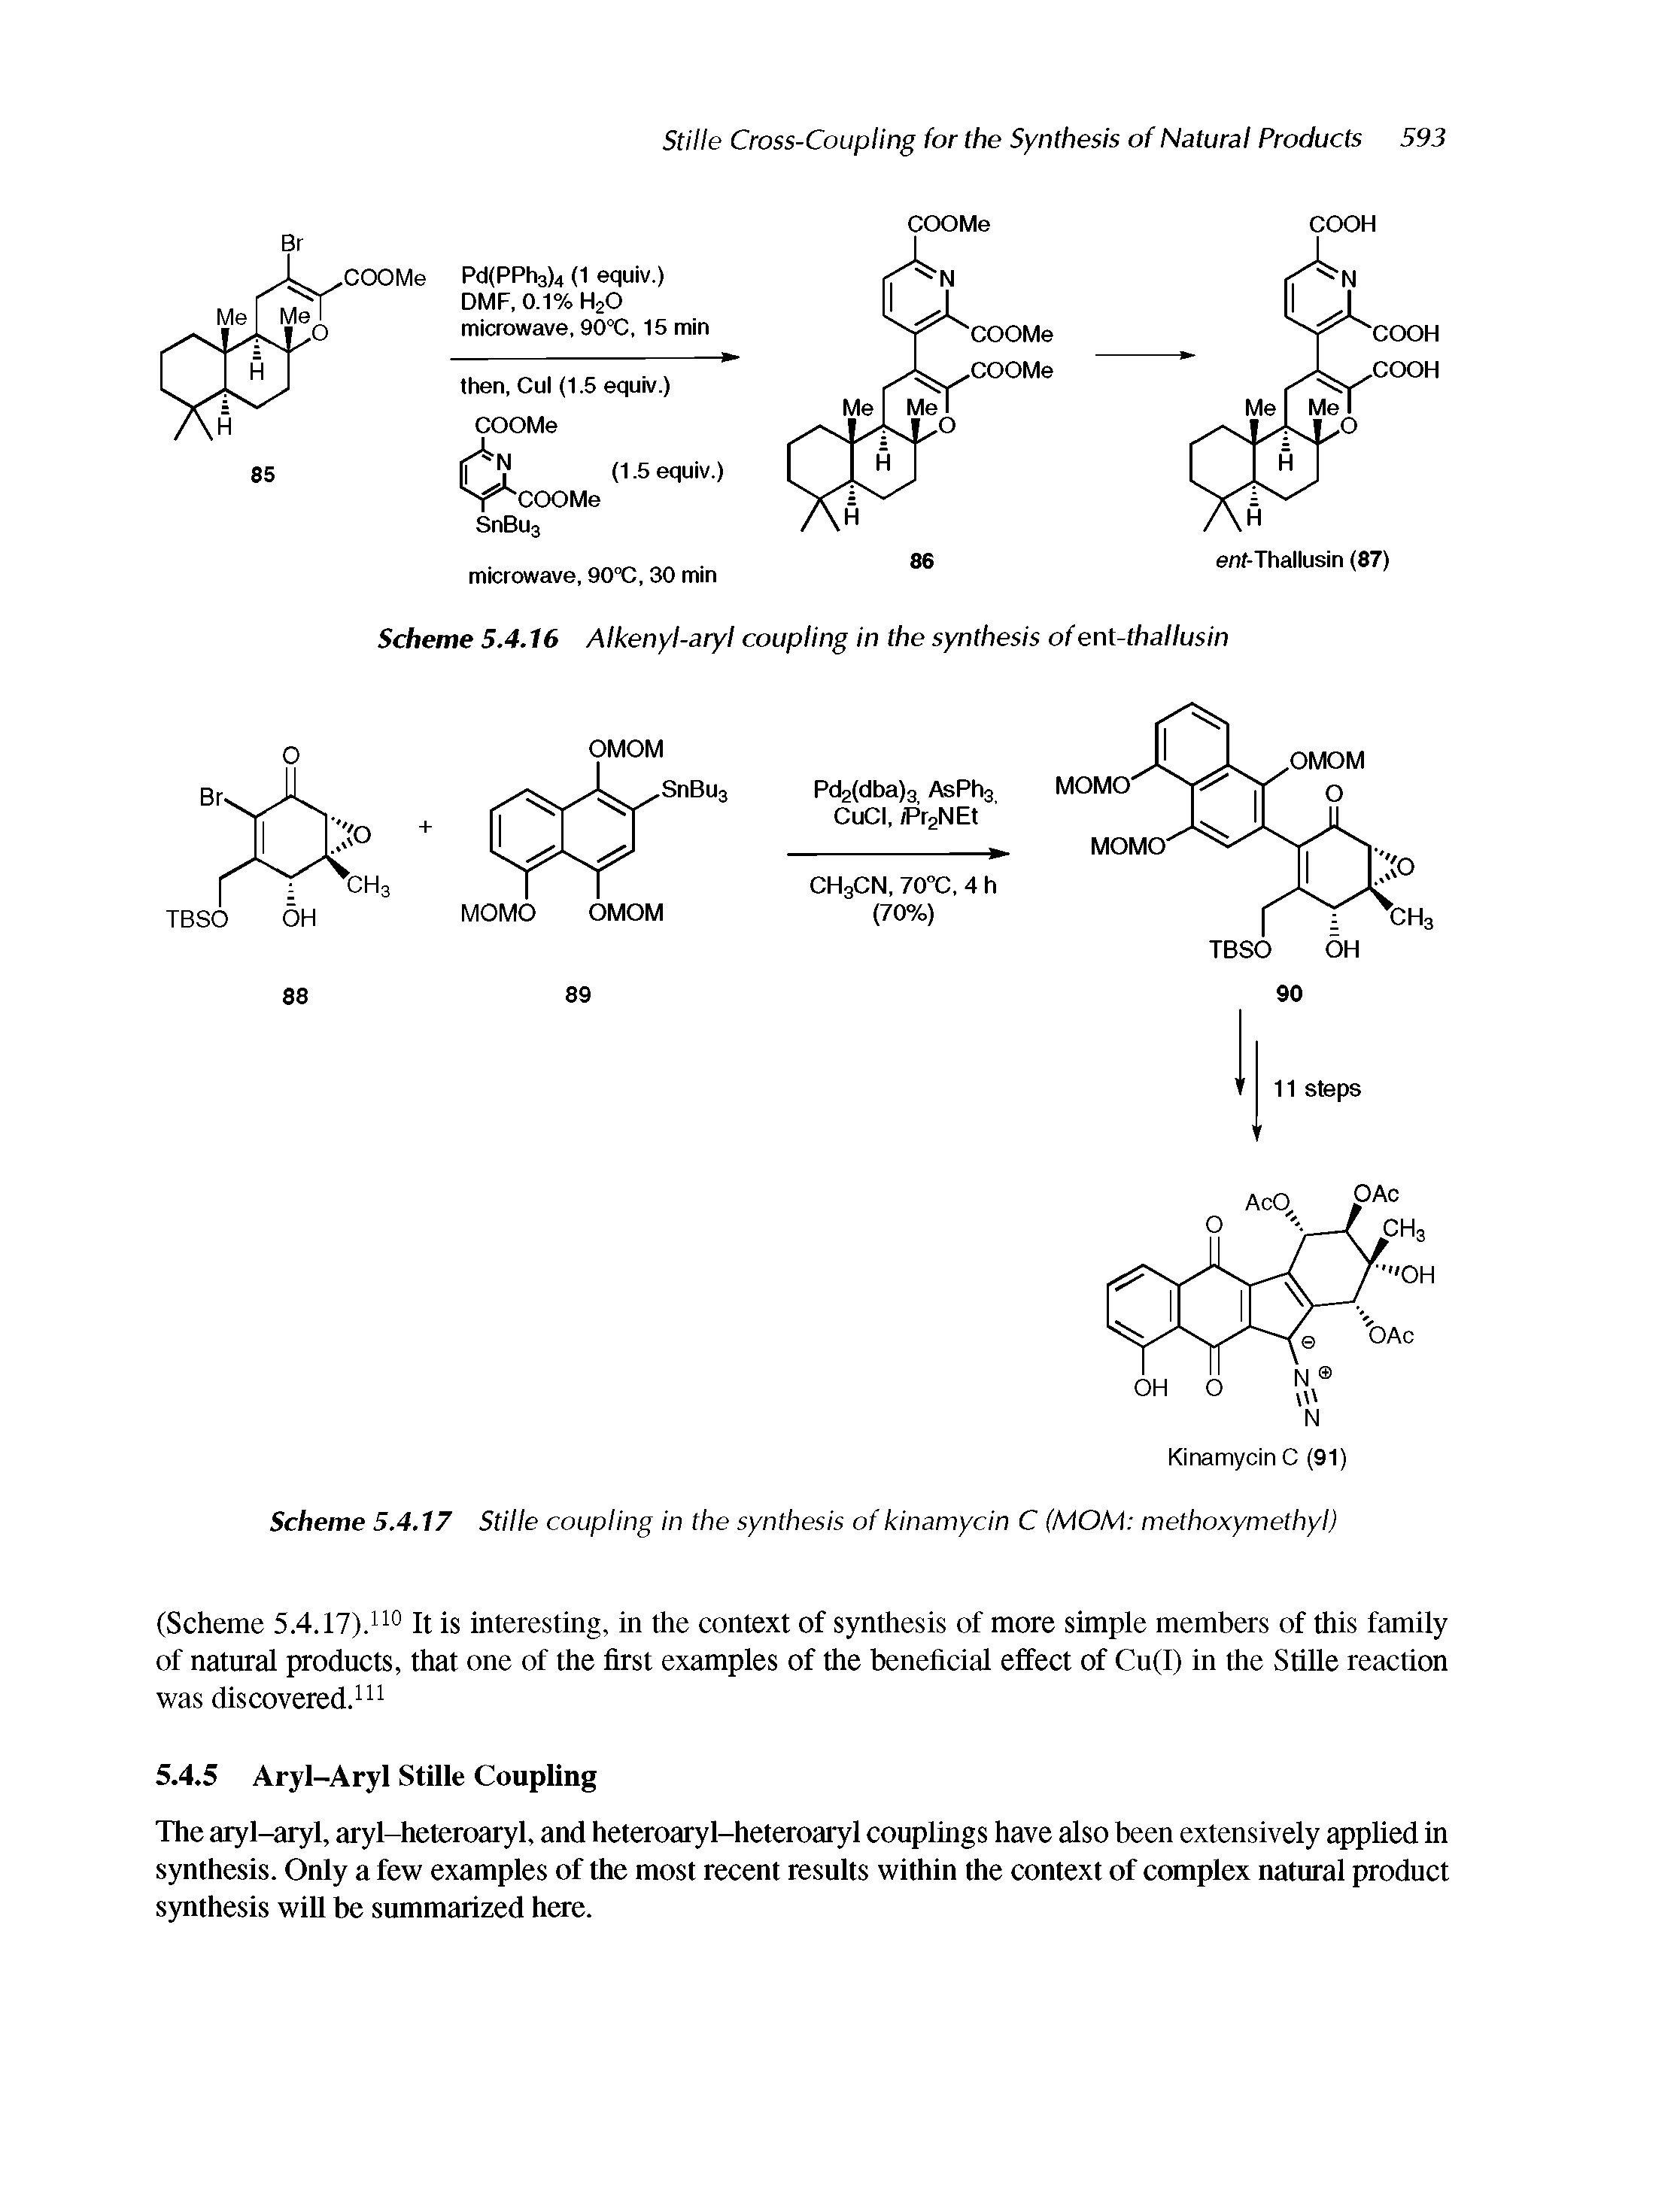 Scheme 5.4.16 Alkenyl-aryl coupling in the synthesis of ent-thallusin...